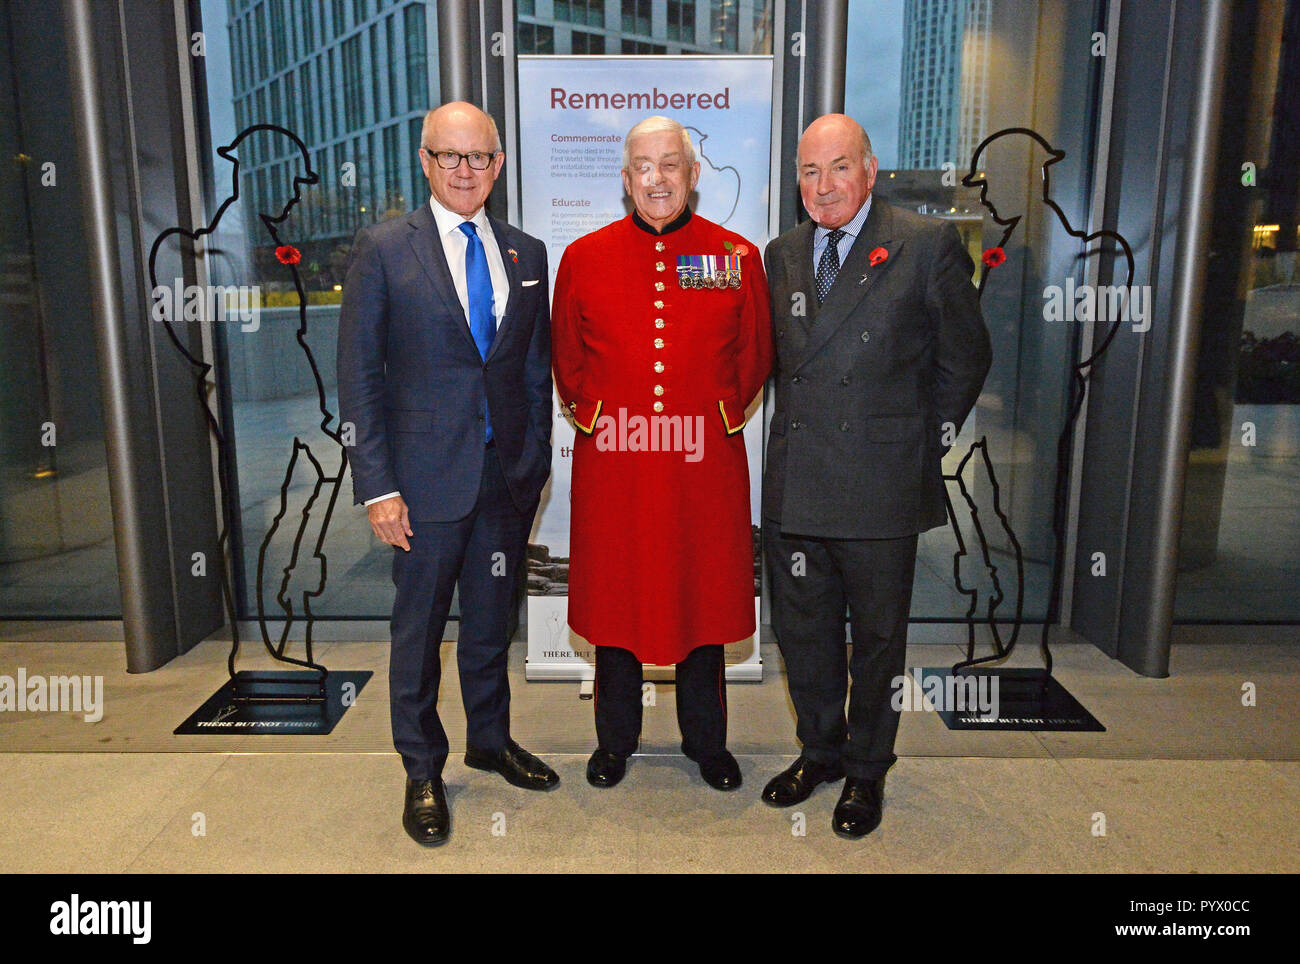 (left to right) US Ambassador to the UK Woody Johnson, Chelsea Pensioner Alan Collins, 81, and General Lord Dannatt during the unveiling of two six-foot Tommy statues, purchased from the There But Not There campaign to commemorate 100 years since the end of the First World War, at the US Embassy in London. Stock Photo